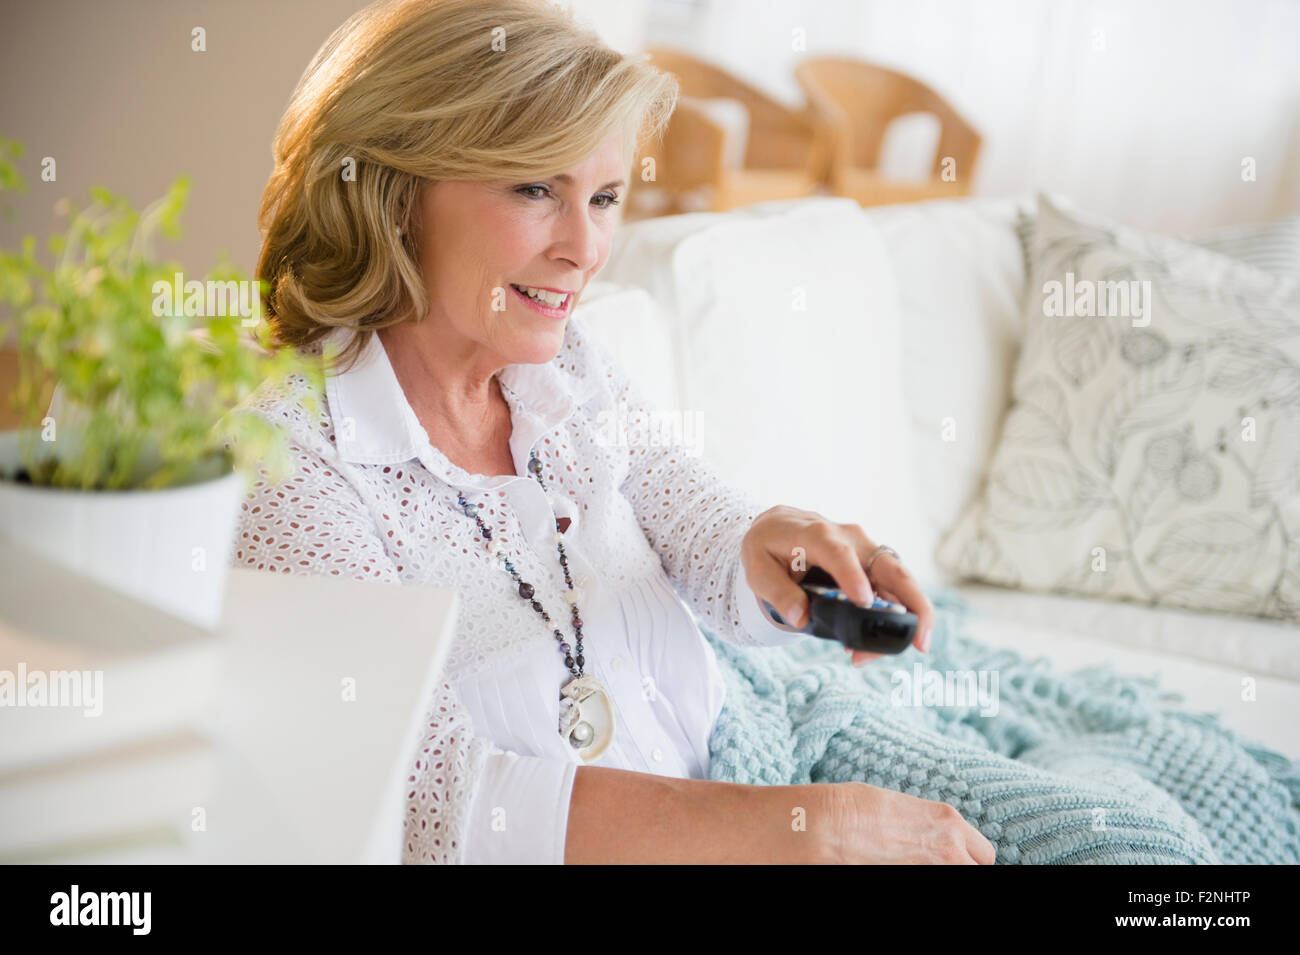 Caucasian woman watching television on sofa Stock Photo